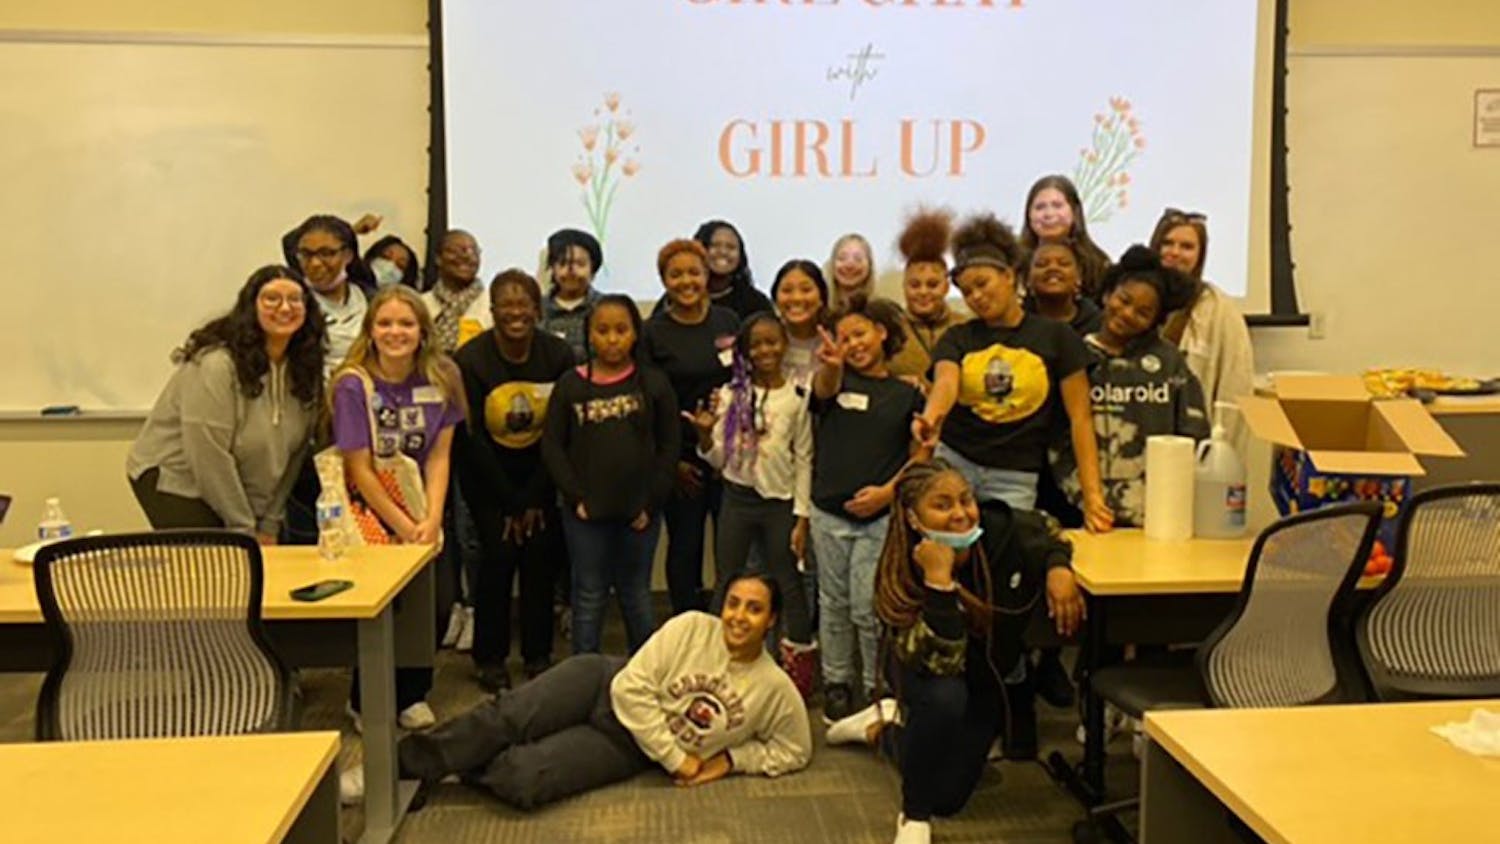 Girl Up club hosts Hannah House girls for discussion about higher education.